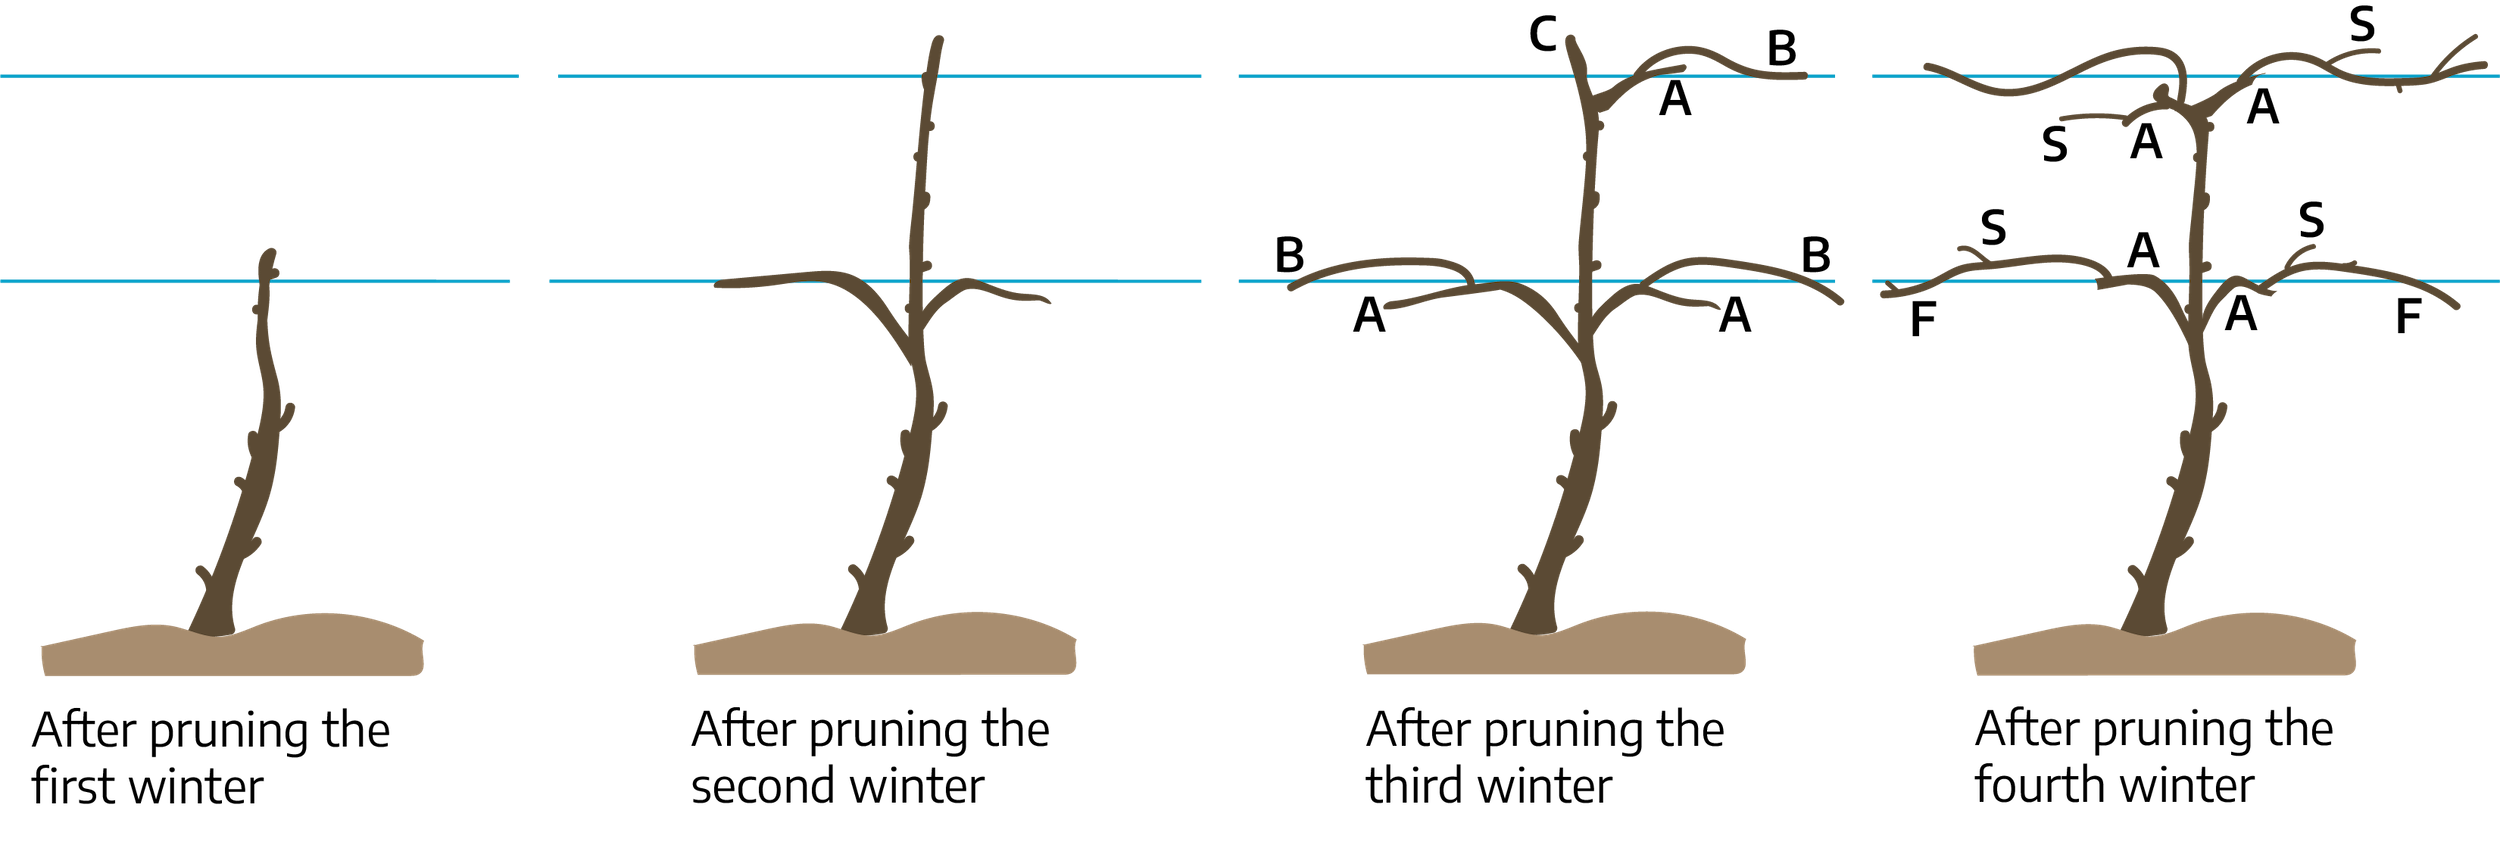 Four cartoon drawings. The first is a straight vine with small spurs along it, "after pruning with first winter." The second is a main straight vine with spurs along it, there are two extending vines on either side about half way up, "after pruning the second winter." The third is a straight main vine with spurs along it, two extending vines "(A)" about halfway up with lateral growths "(B)," the top of the vine has an extending vine "(A)" on the right side with a lateral growth "(B)," and the top "(C)"; marked "after pruning the third winter." The fourth is a straight man vine with spurs along it, two extending vines "(A)" halfway up with lateral growths "(F)," these have smaller offshoots "(S)," the top of the vine has two extending growths "(A)" with smaller growths "(S)"; marked "after pruning the fourth winter."